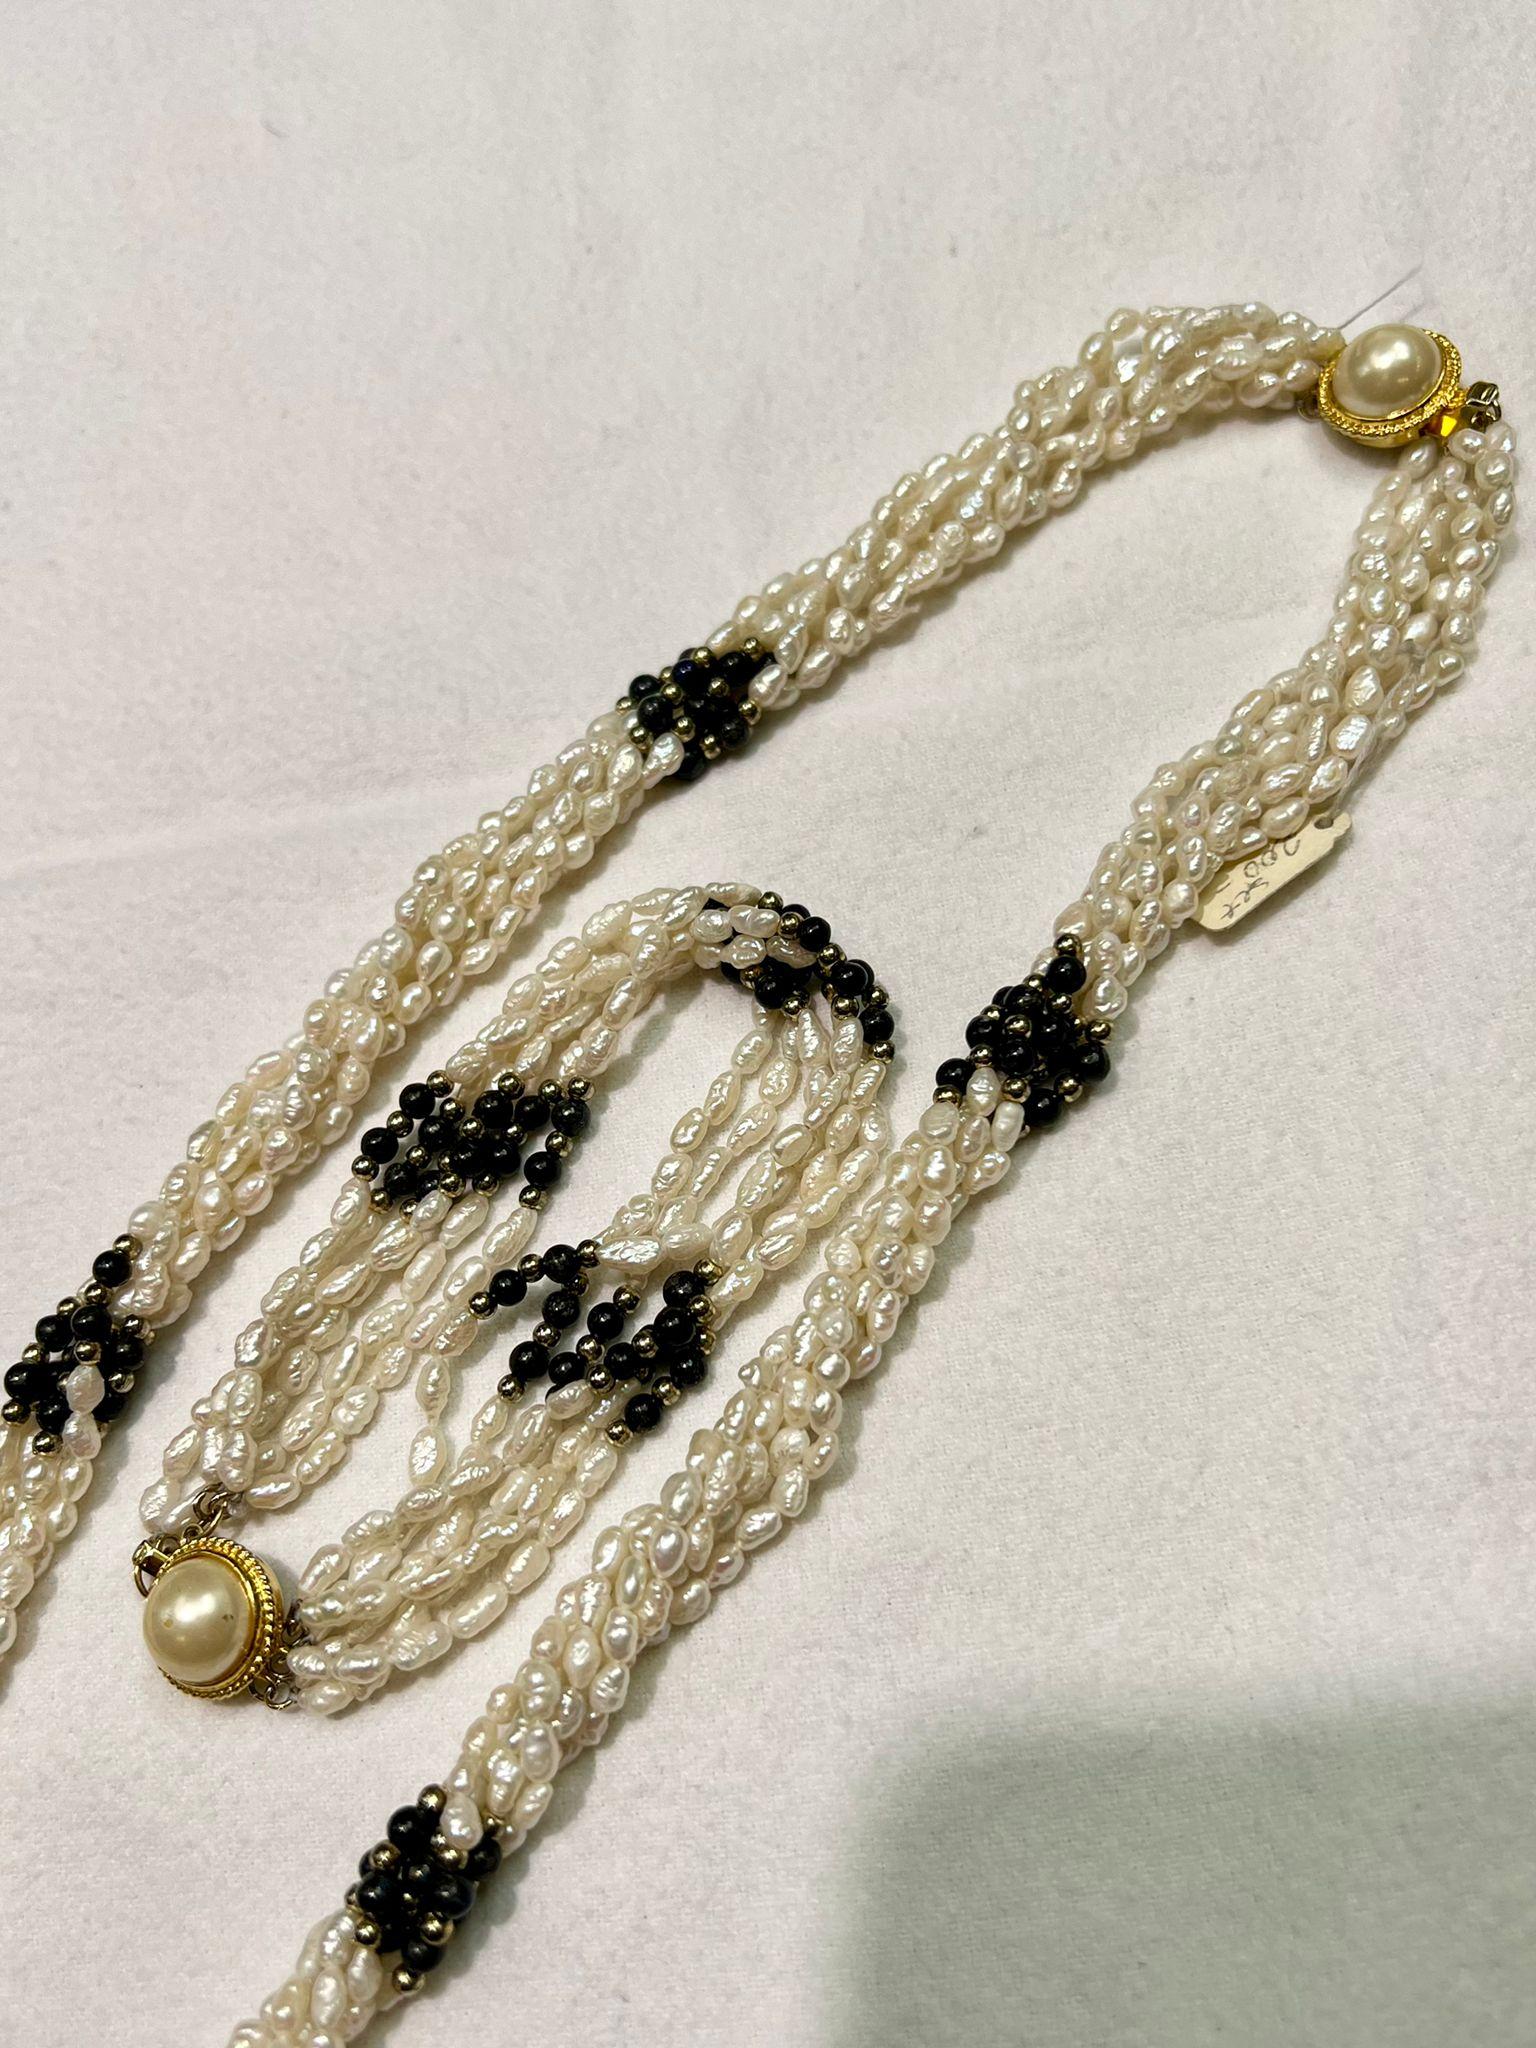 Set of Necklace and Bracelet Freshwater Pearls with Mabe Pearl Clasp Necklace 2 For Sale 8